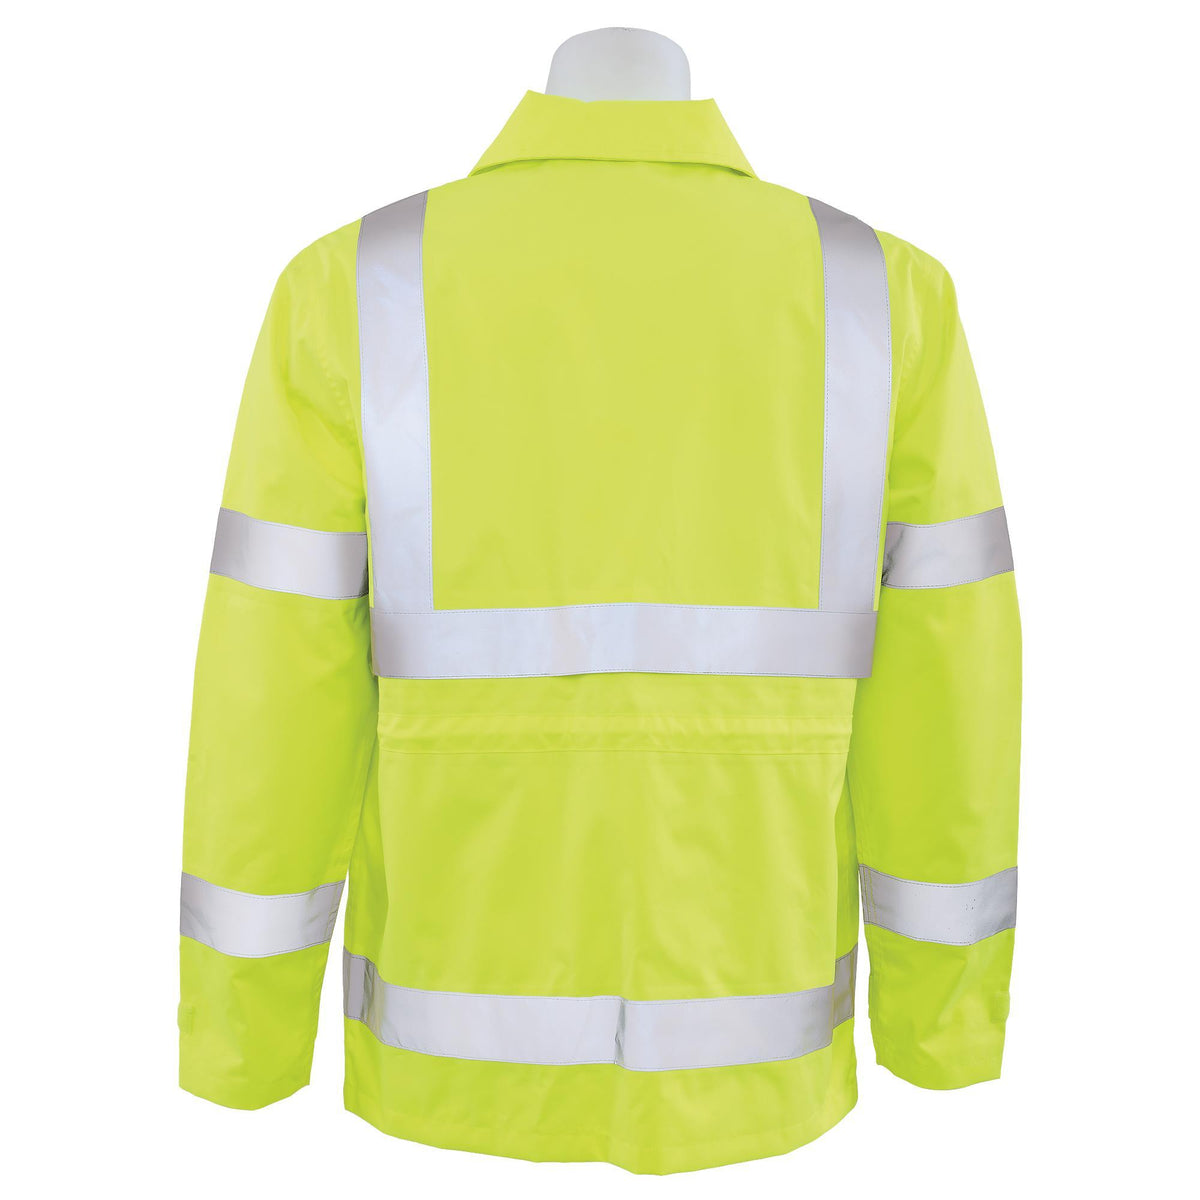 S371 Cl 3 Raincoat with 3M® Reflective Tape